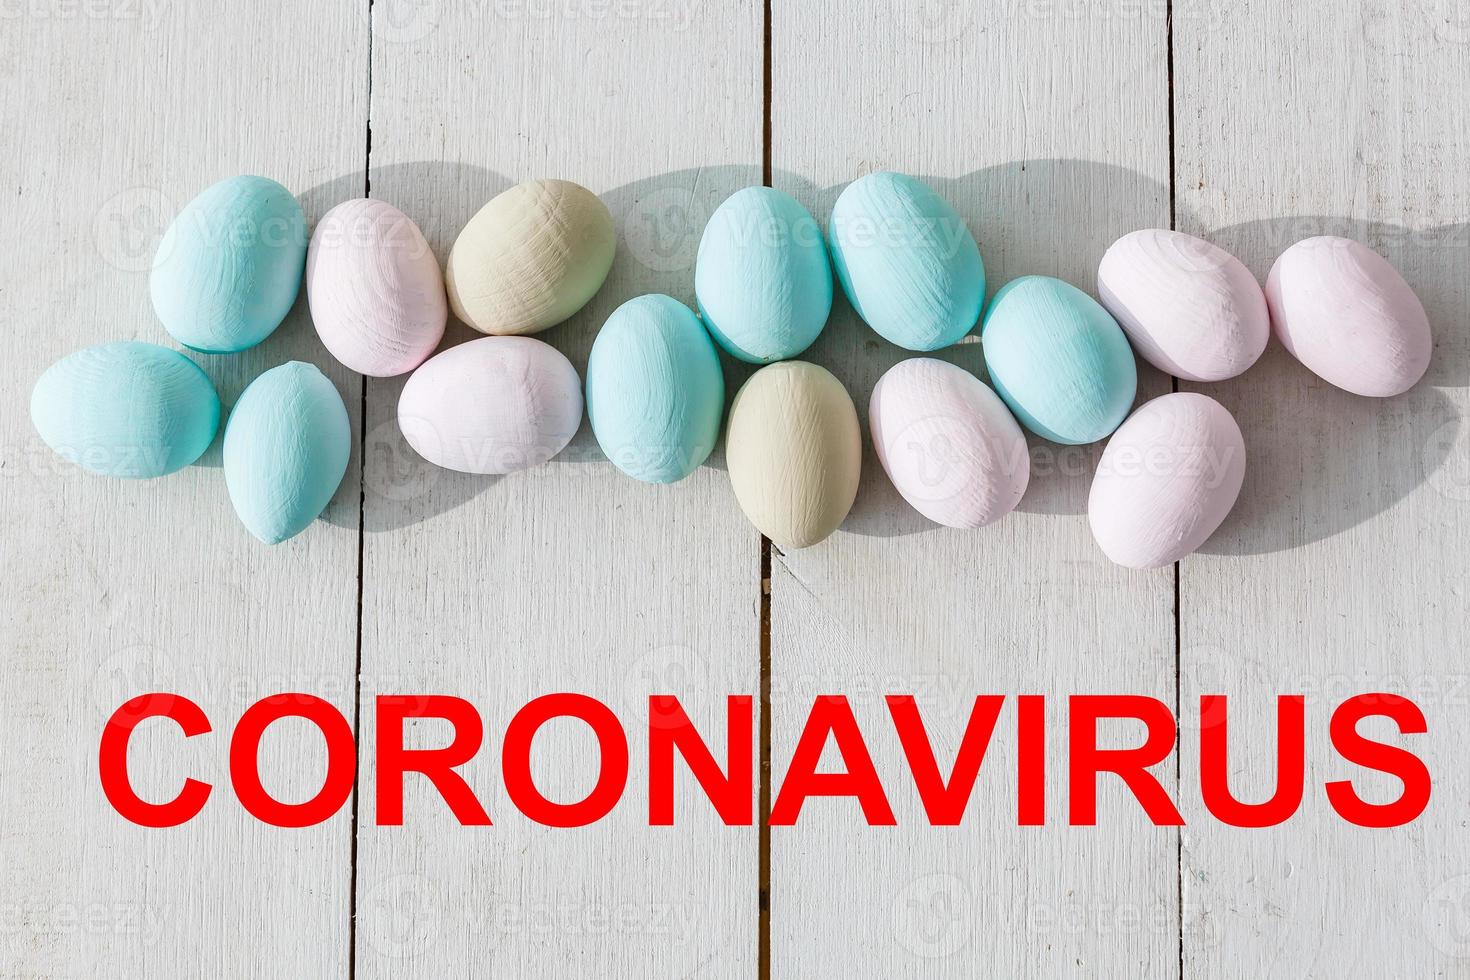 Easter eggs wearing a medical to protect against coronavirus. photo